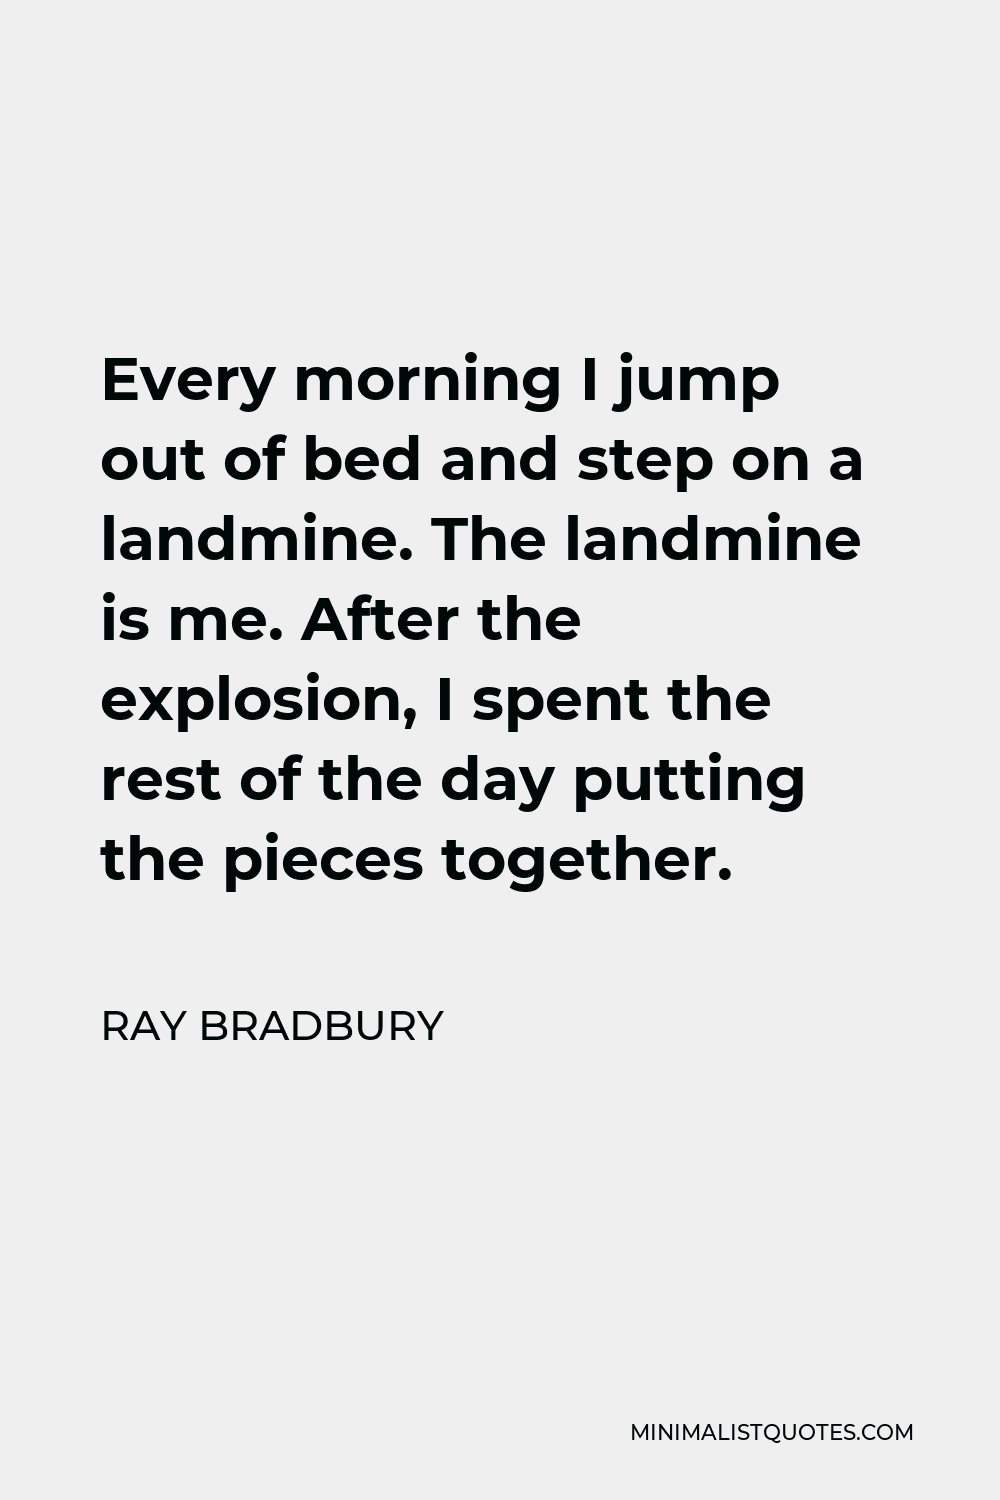 Ray Bradbury Quote - Every morning I jump out of bed and step on a landmine. The landmine is me. After the explosion, I spent the rest of the day putting the pieces together.